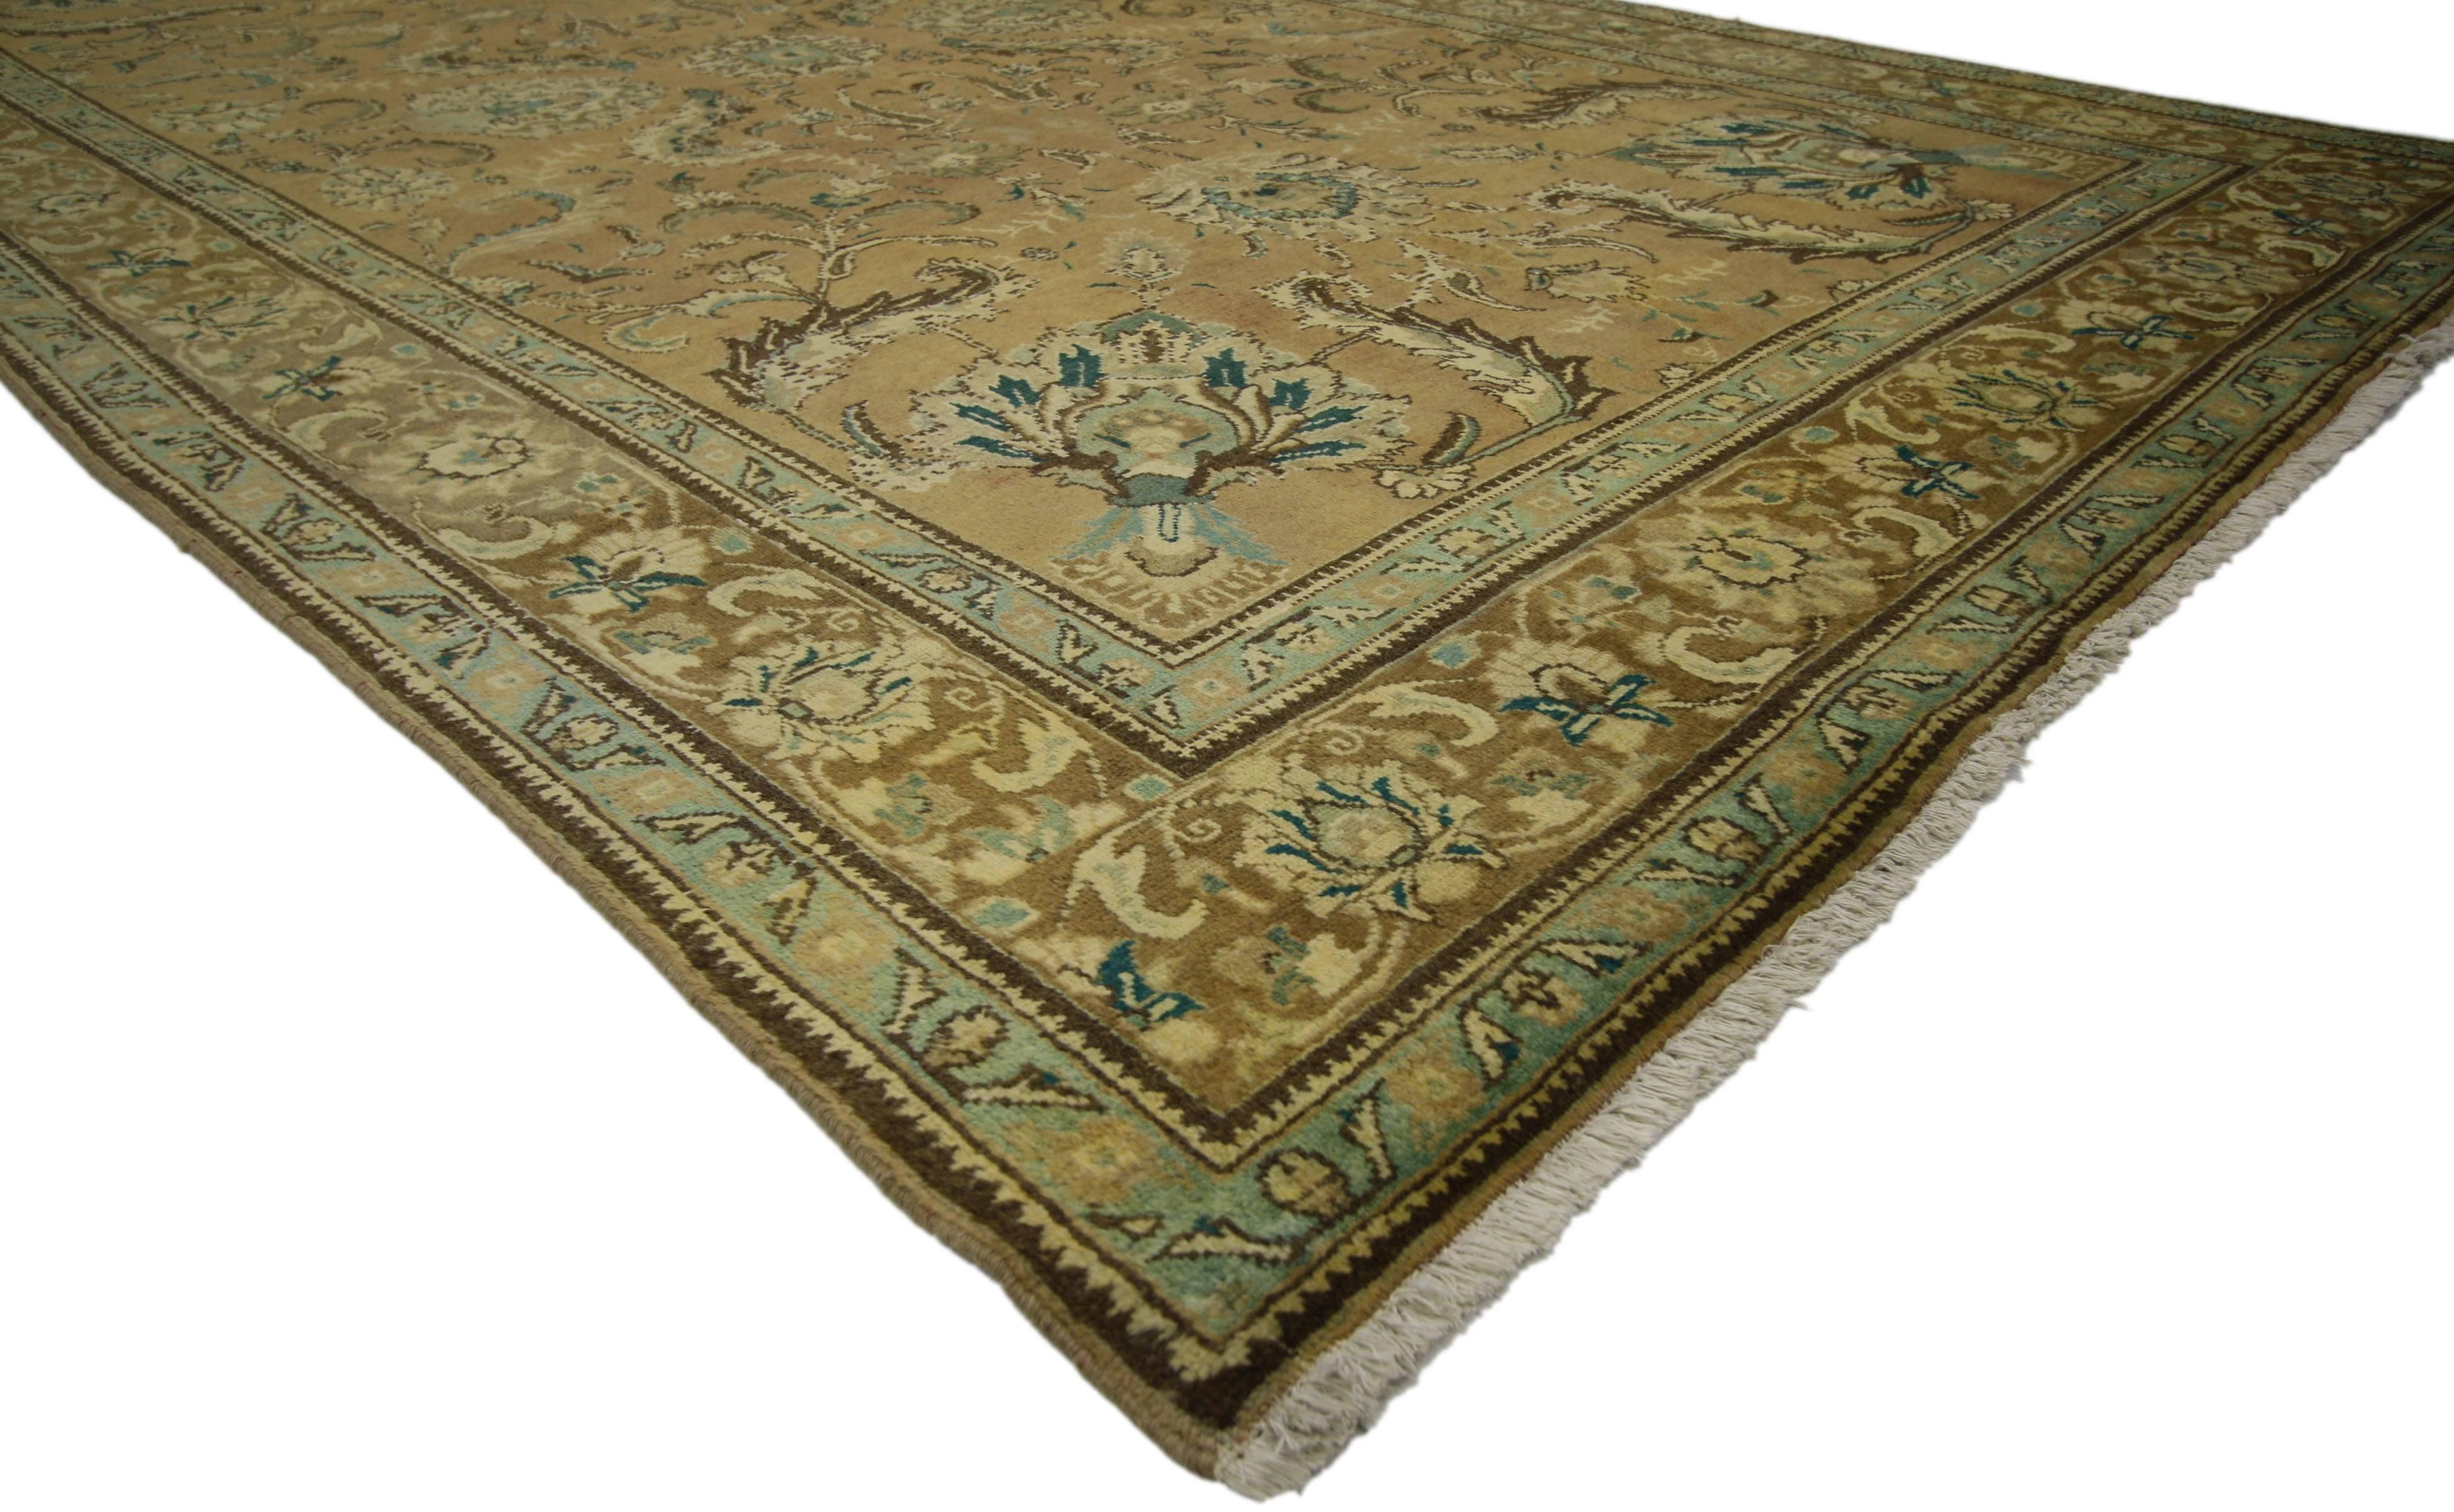 76335, vintage Persian Tabriz rug with traditional style. This hand-knotted wool vintage Persian Tabriz rug features an all-over pattern surrounded by a Classic border creating a well-balanced and timeless design. This vintage Persian Tabriz rug